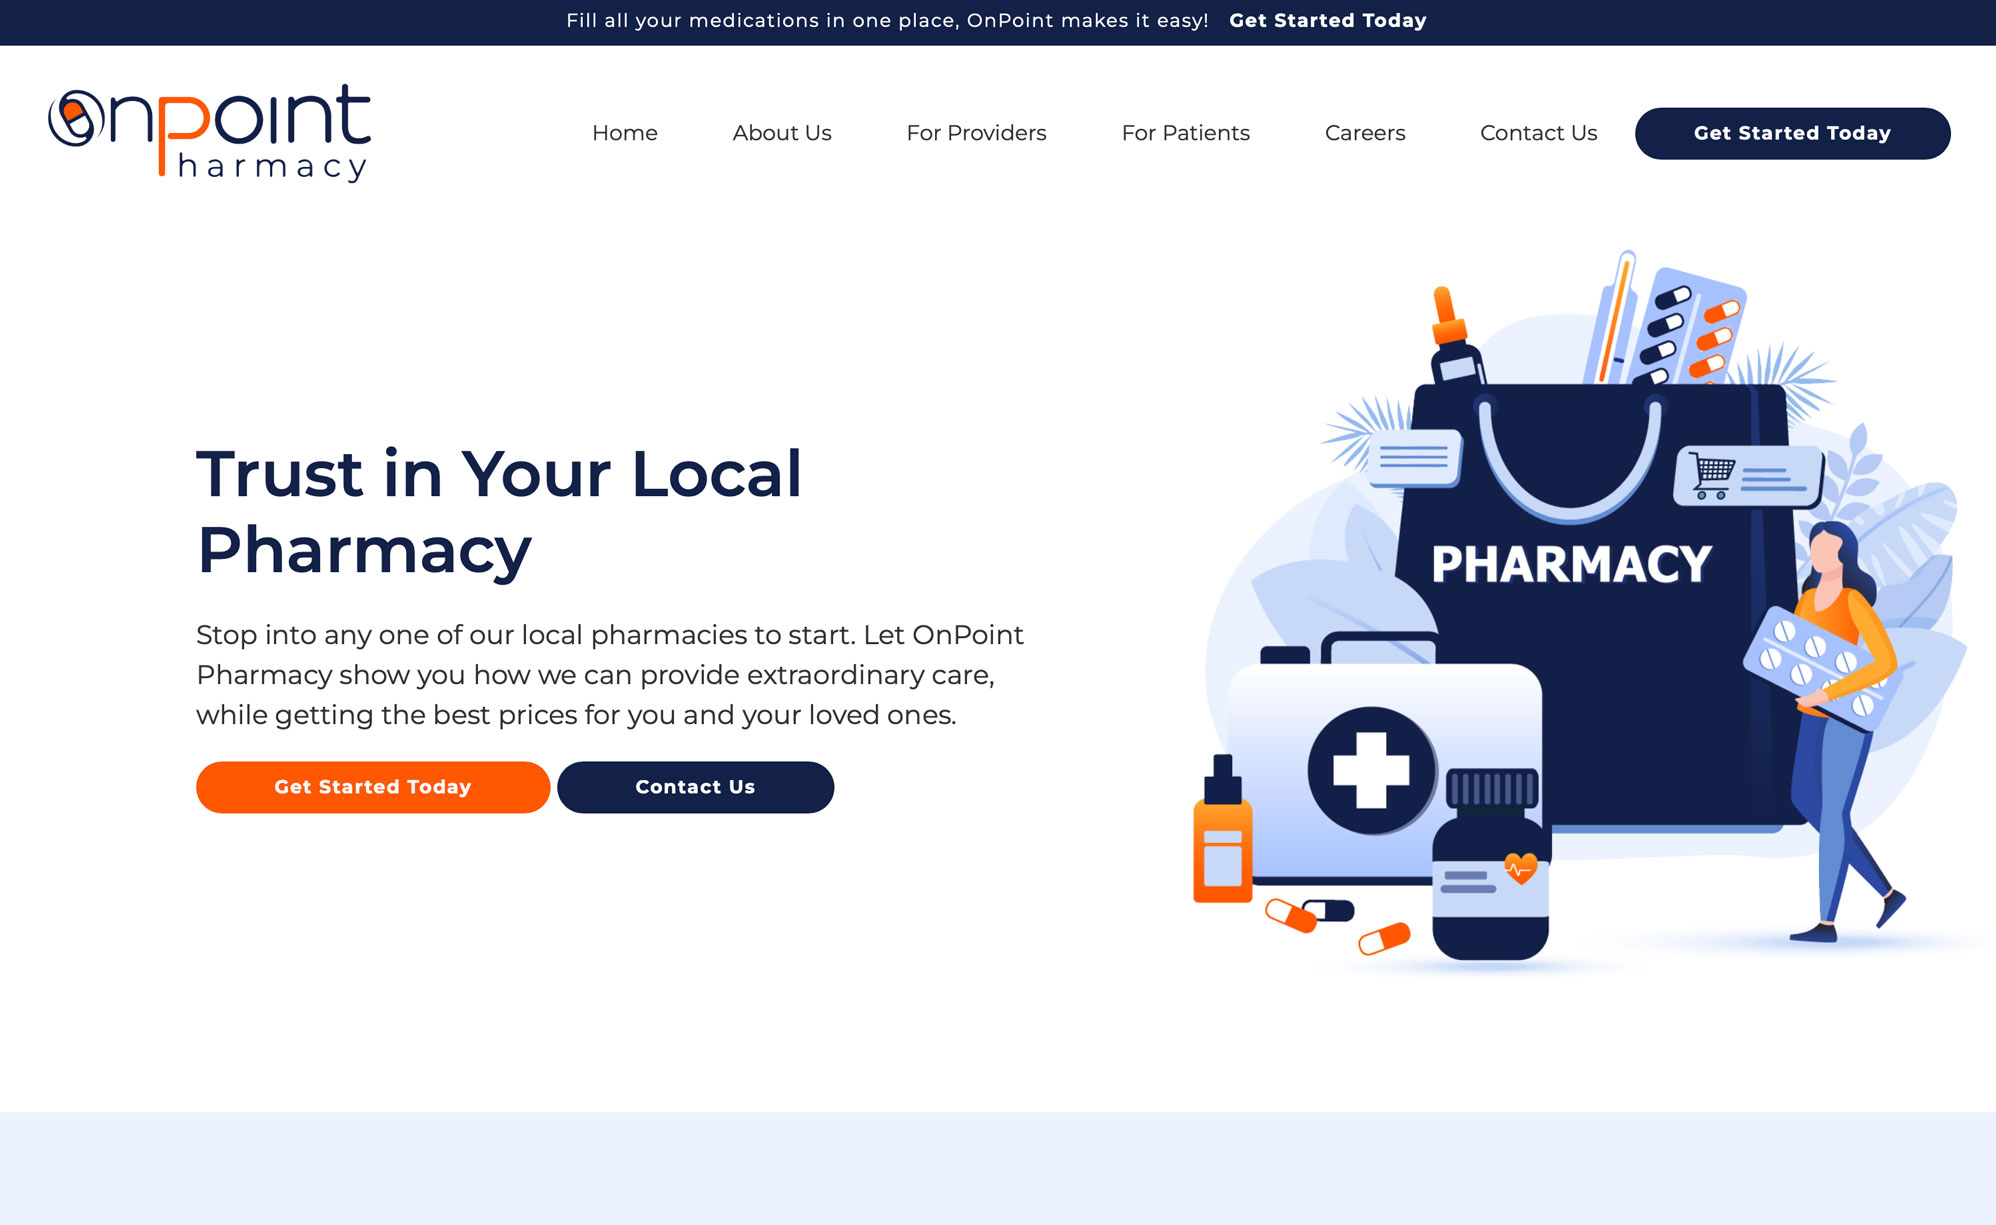 Home page of OnPoint Pharmacy - Designed and developed by Logic Web Media of Long Island